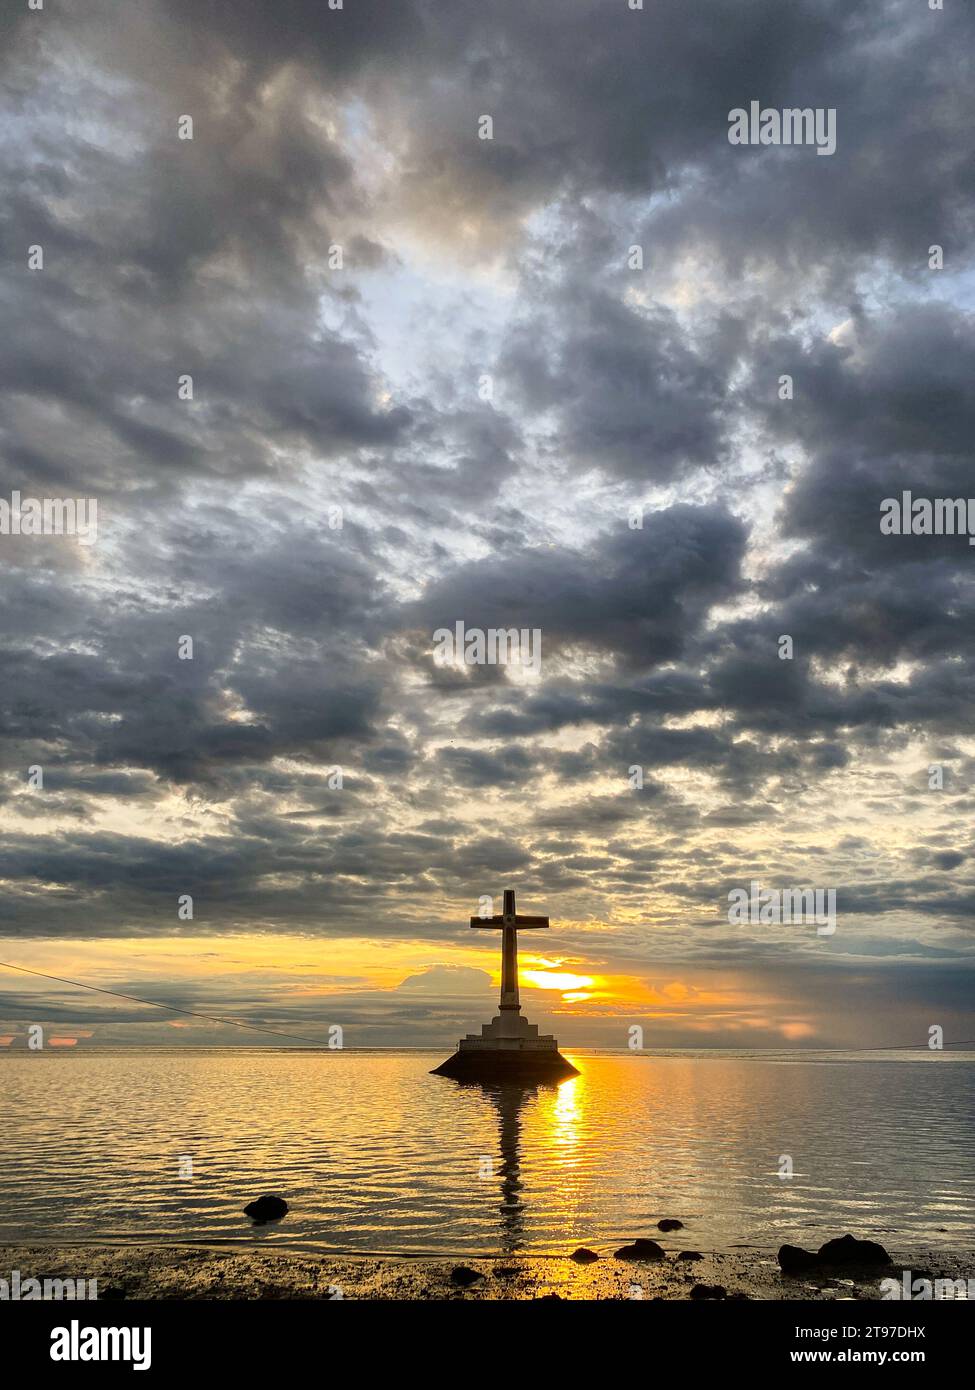 Sunset over the Sunken Cemetery. Beautiful sky and clouds. Camiguin Island. Philippines. Stock Photo